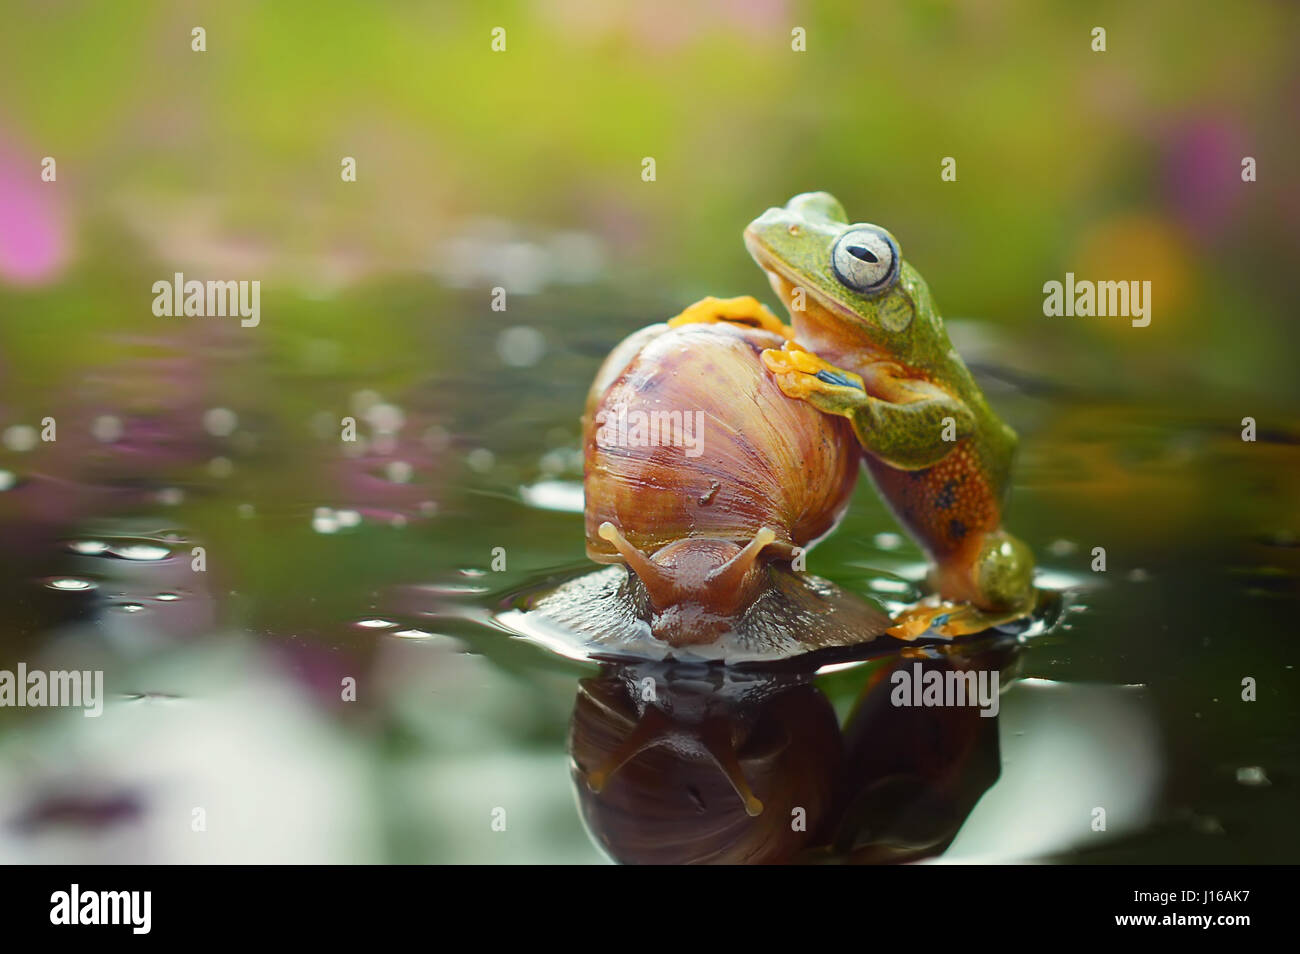 WATCH the incredible moment a frog hitches on what could be the slowest ride ever. This laughing frog must be one of the most cheeky ever after jumping on the shell of a hapless snail so he can take it for a “spin”. Indonesian government officer Harfian Herdi (27) from Sambas in West Kalimantan took the extraordinary pictures from a small garden near his home. “The snails did not react, he continued to move casually as if nothing had happened,” said Harfian. “People are always amazed and excited to see moments such as this.” Stock Photo